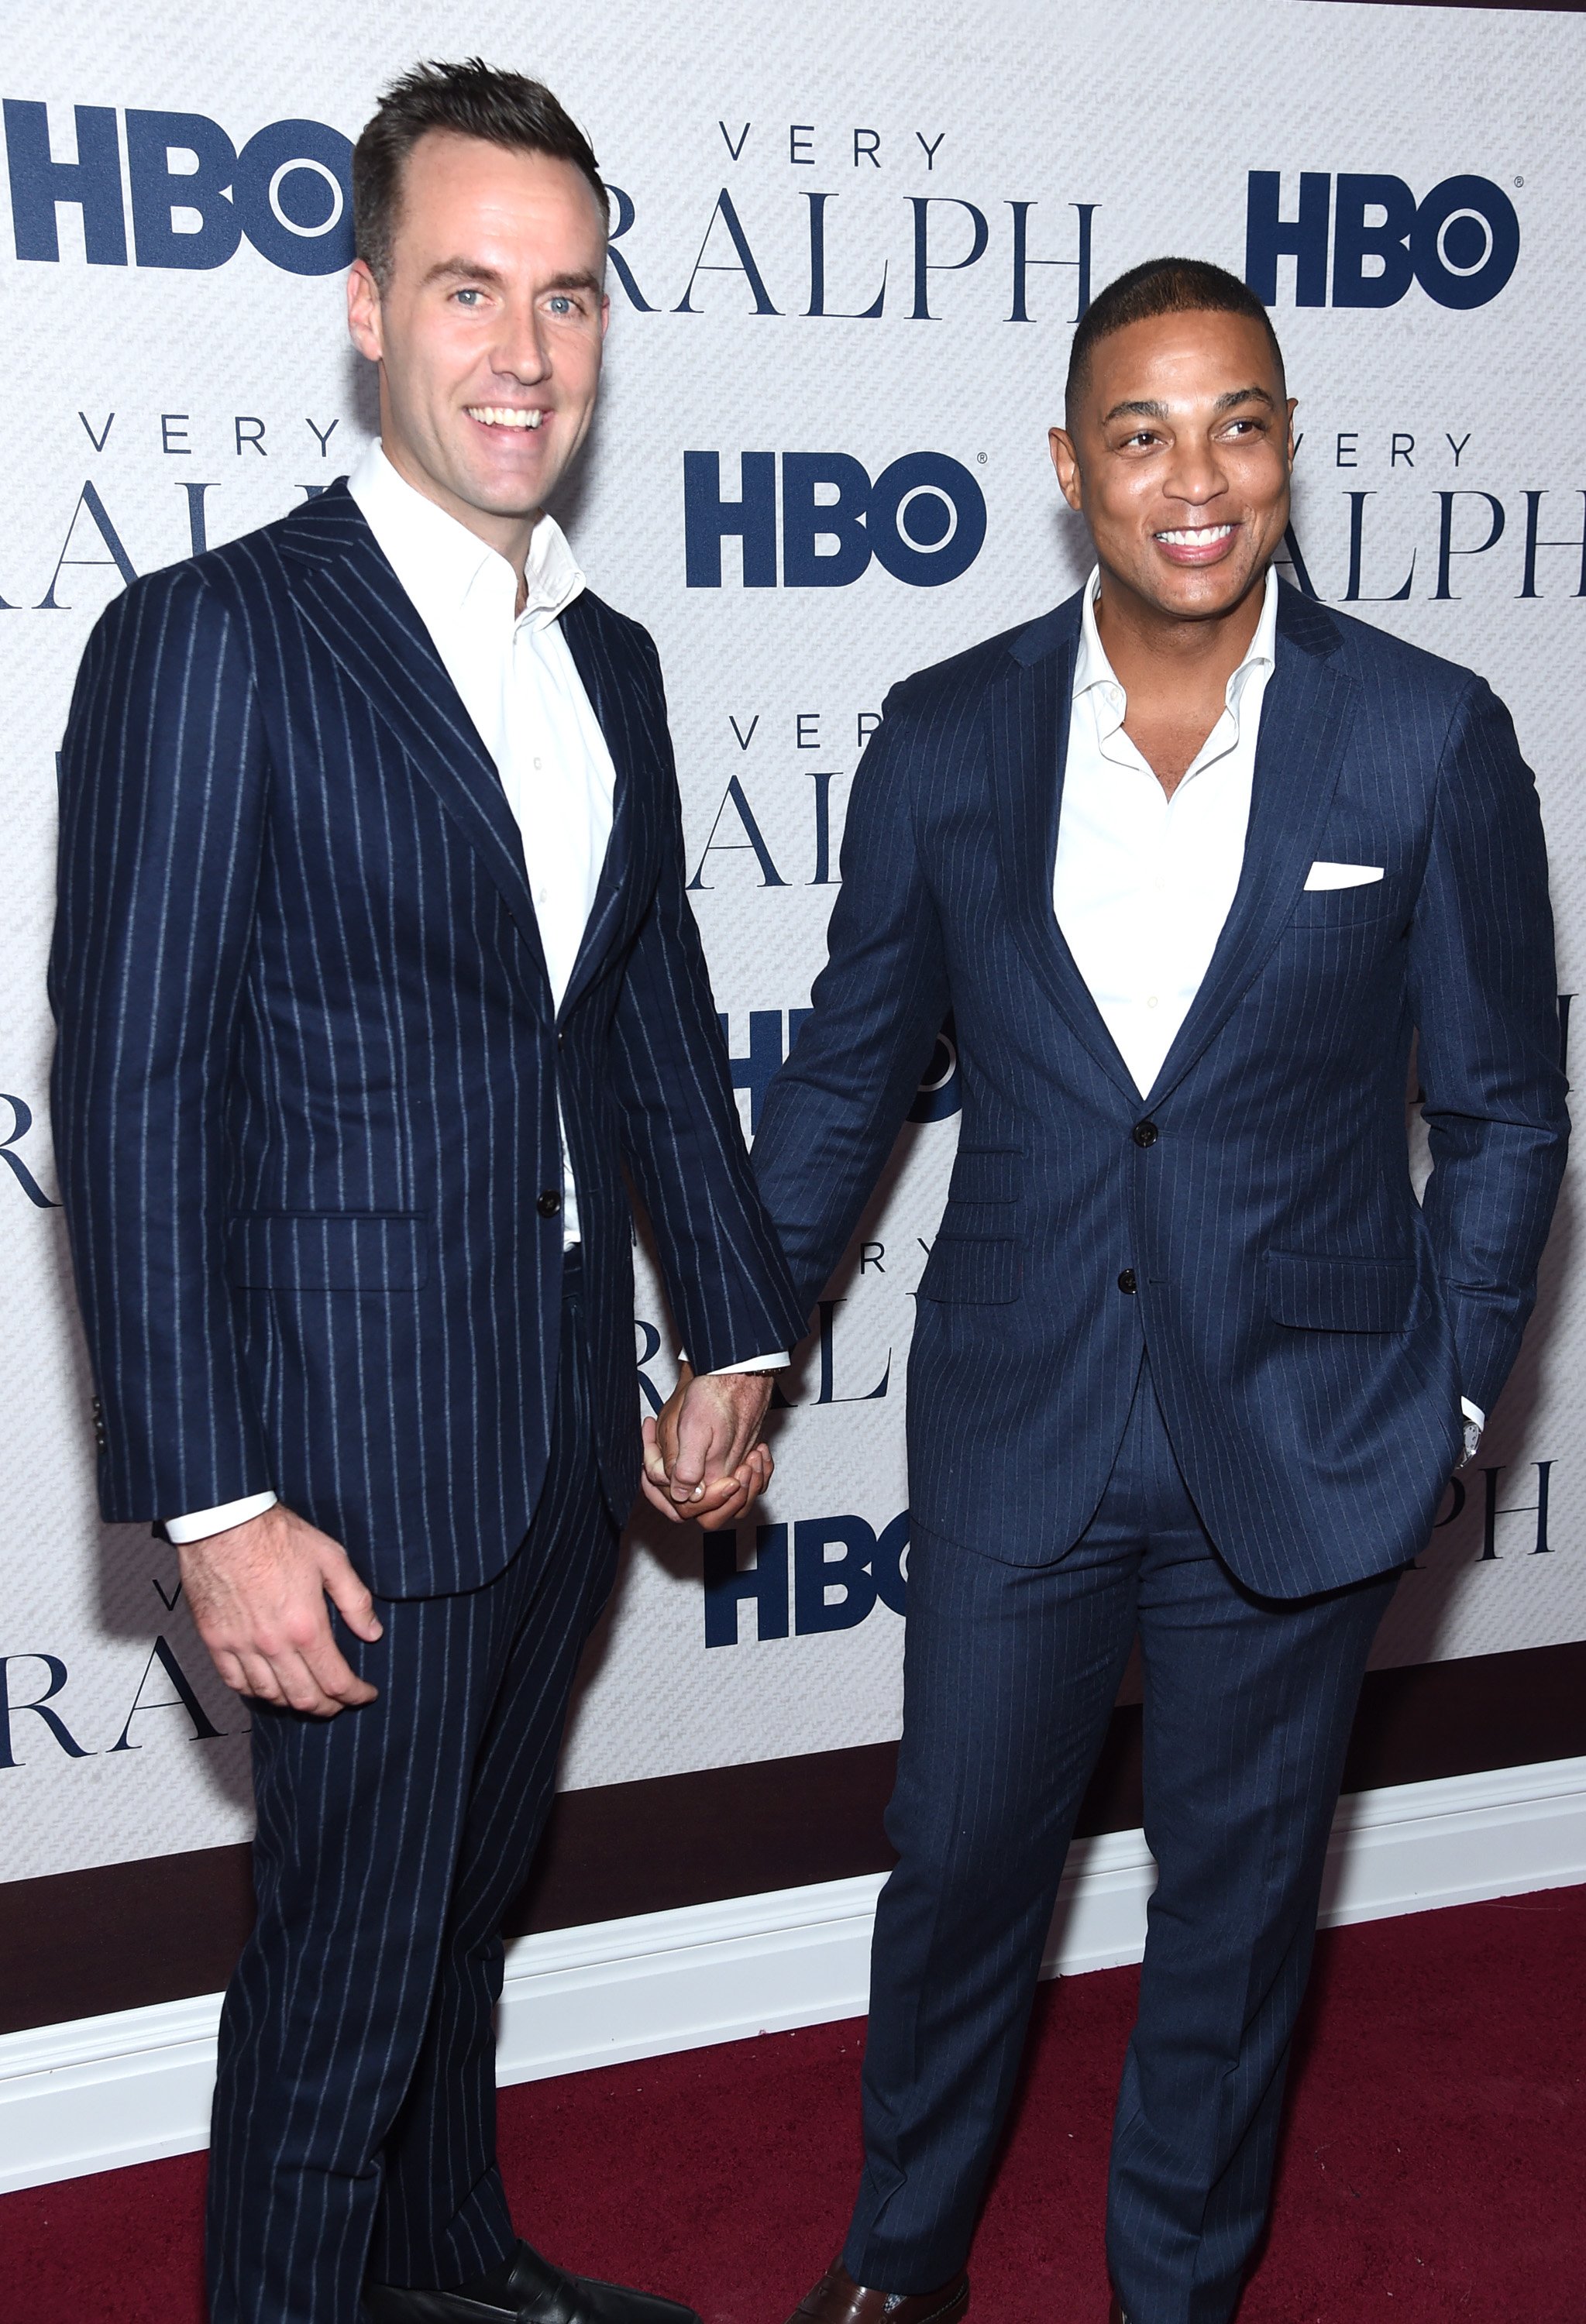 Tim Malone and Don Lemon at the HBO's 